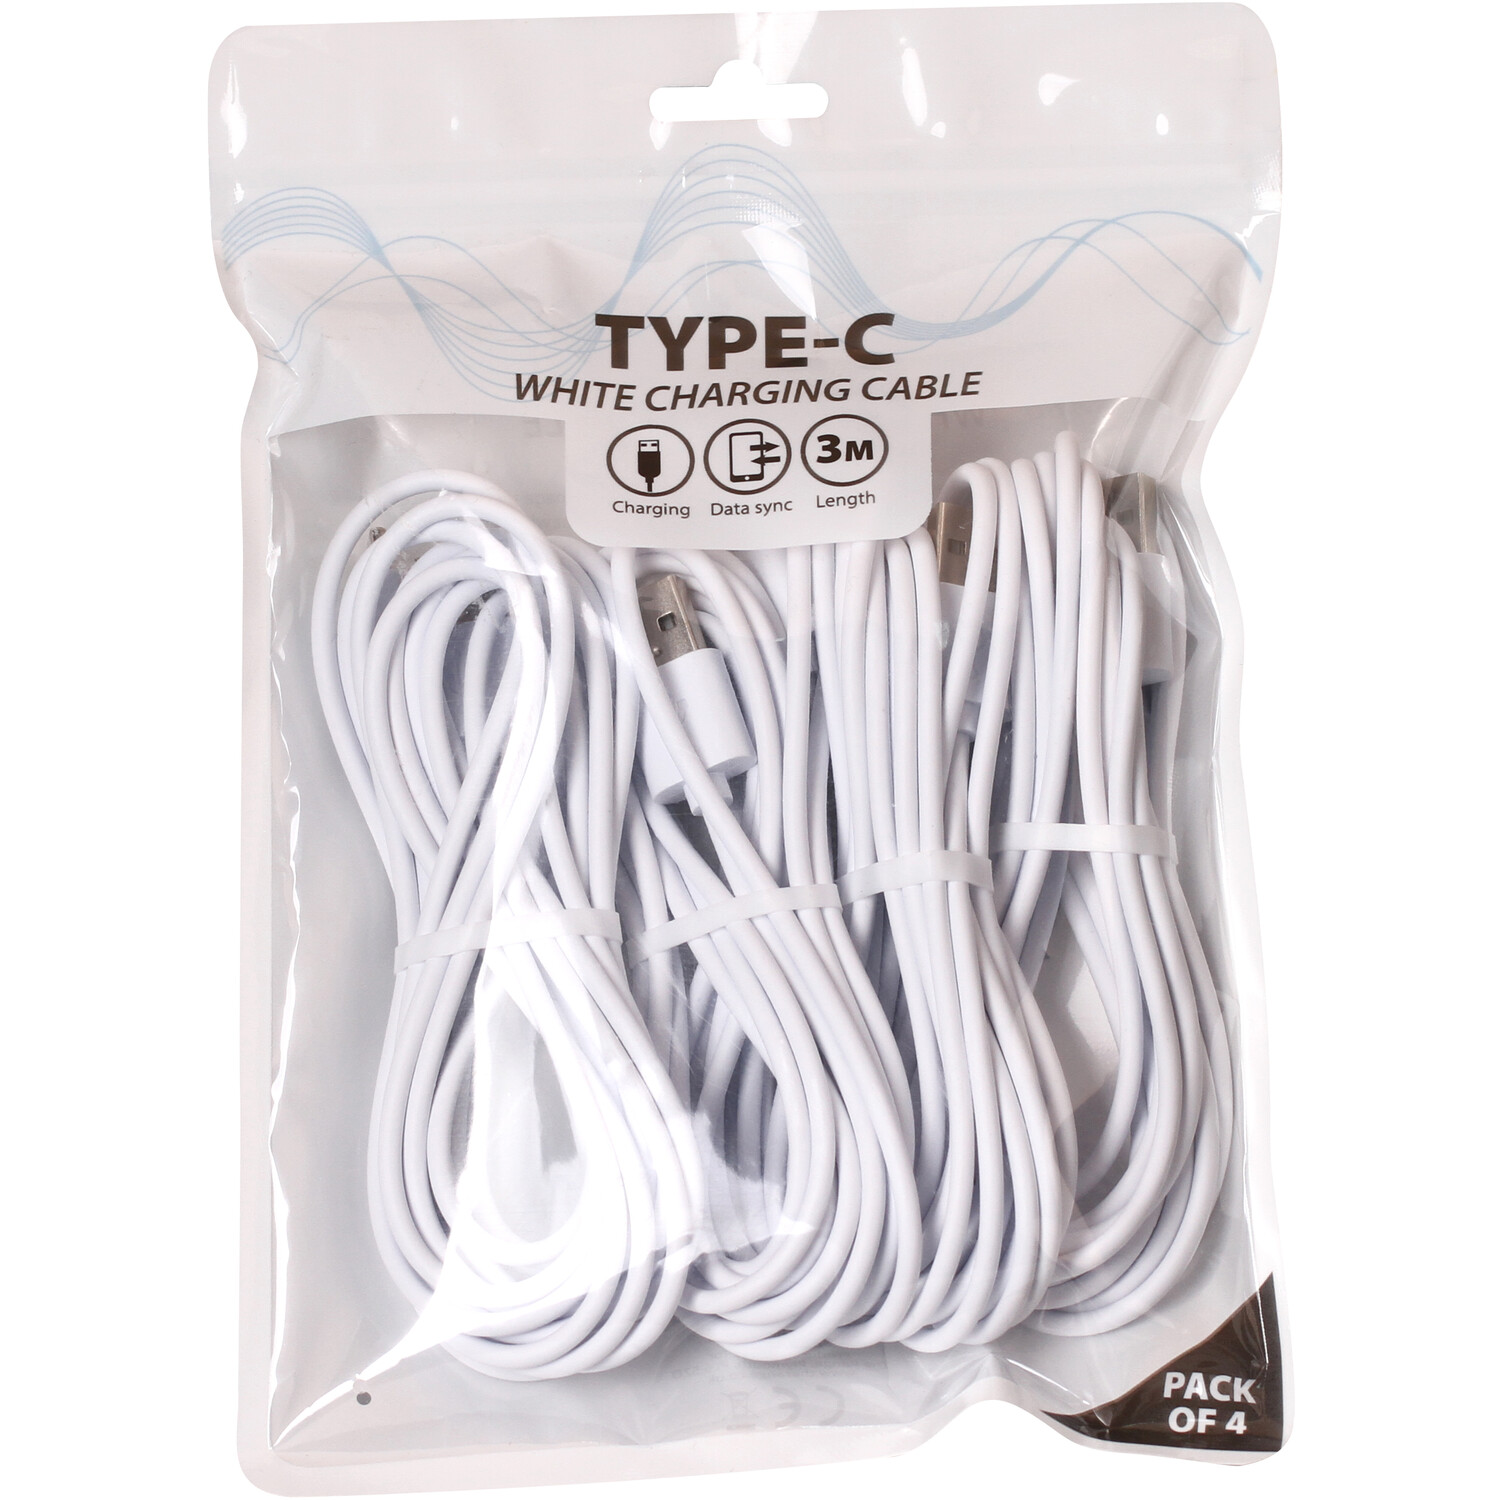 Pack of 4 Type-C White Charging Cables Image